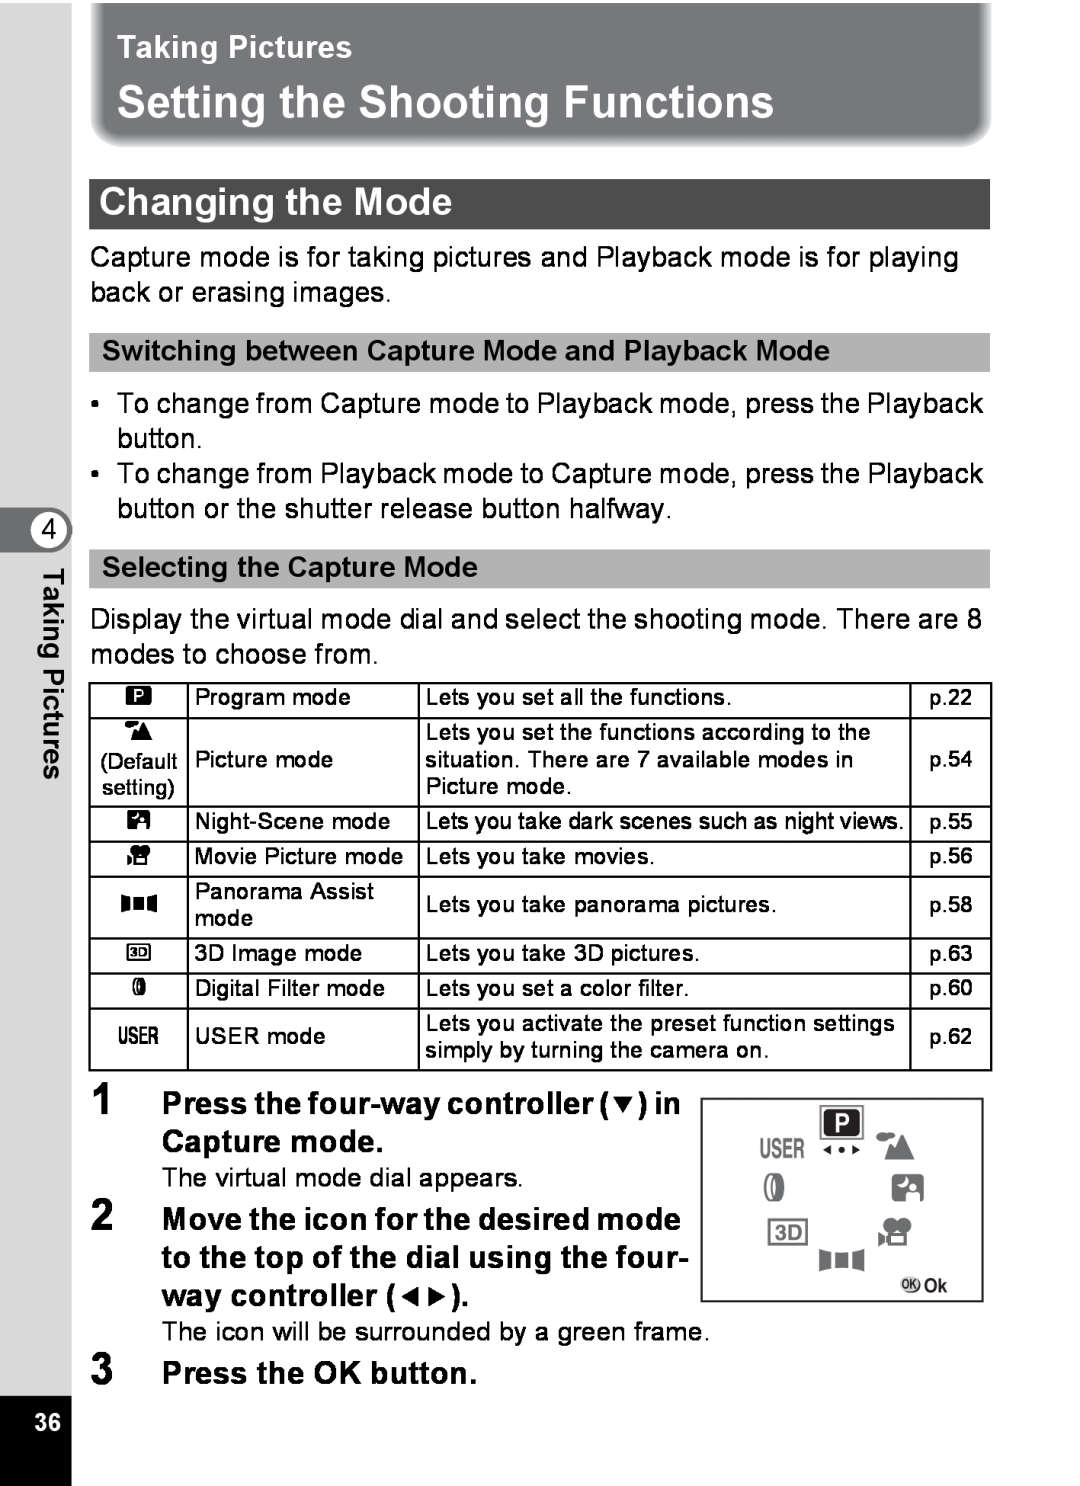 Pentax S4 manual Setting the Shooting Functions, Changing the Mode, Taking Pictures, Press the four-way controller 3 in 